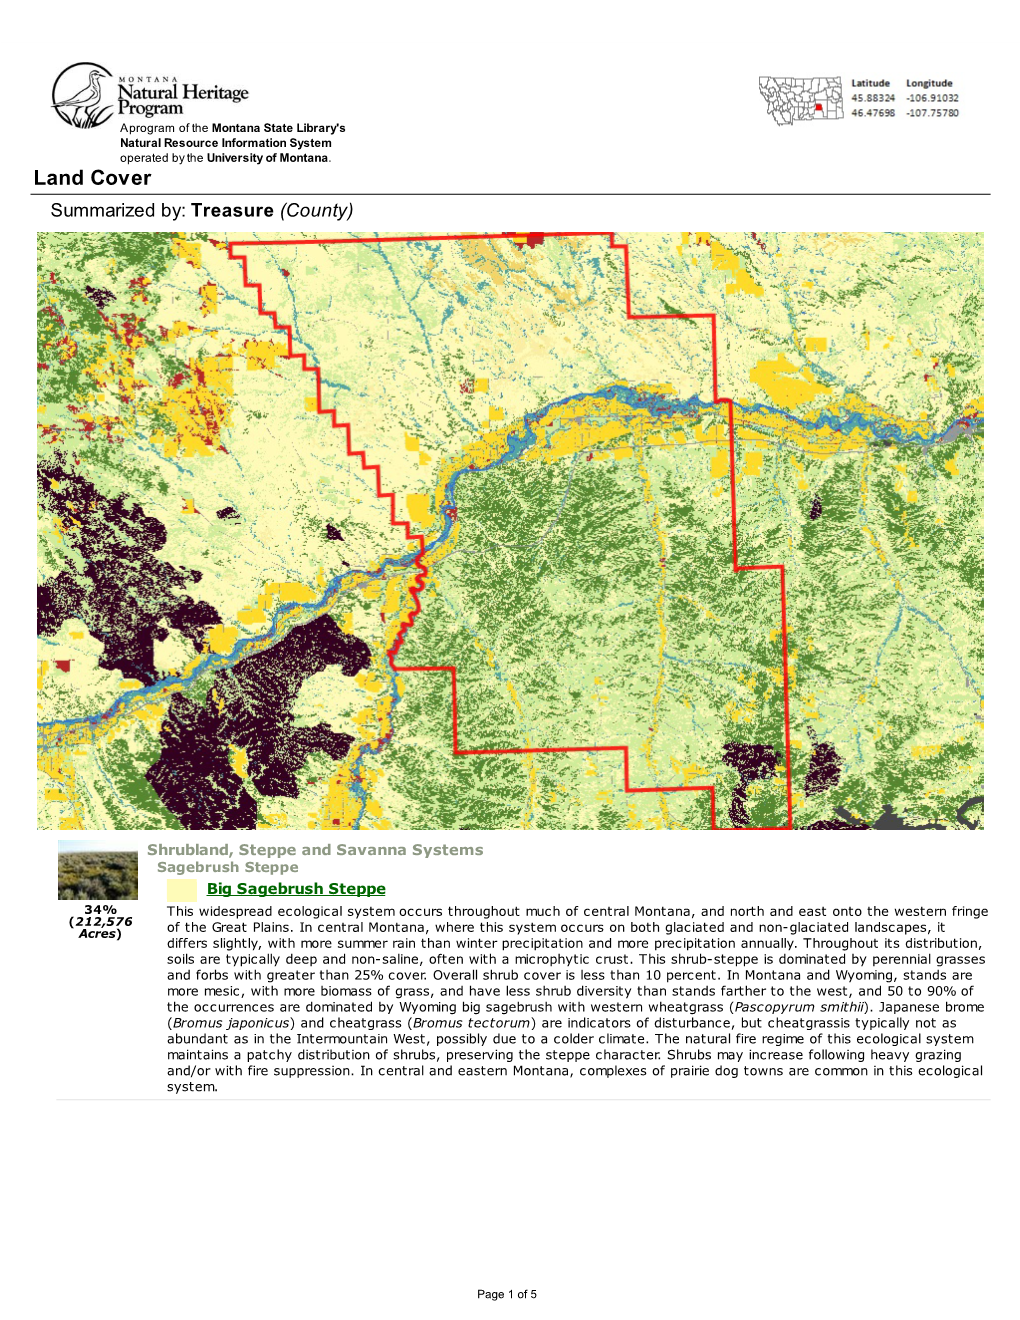 Land Cover Summarized By: Treasure (County)